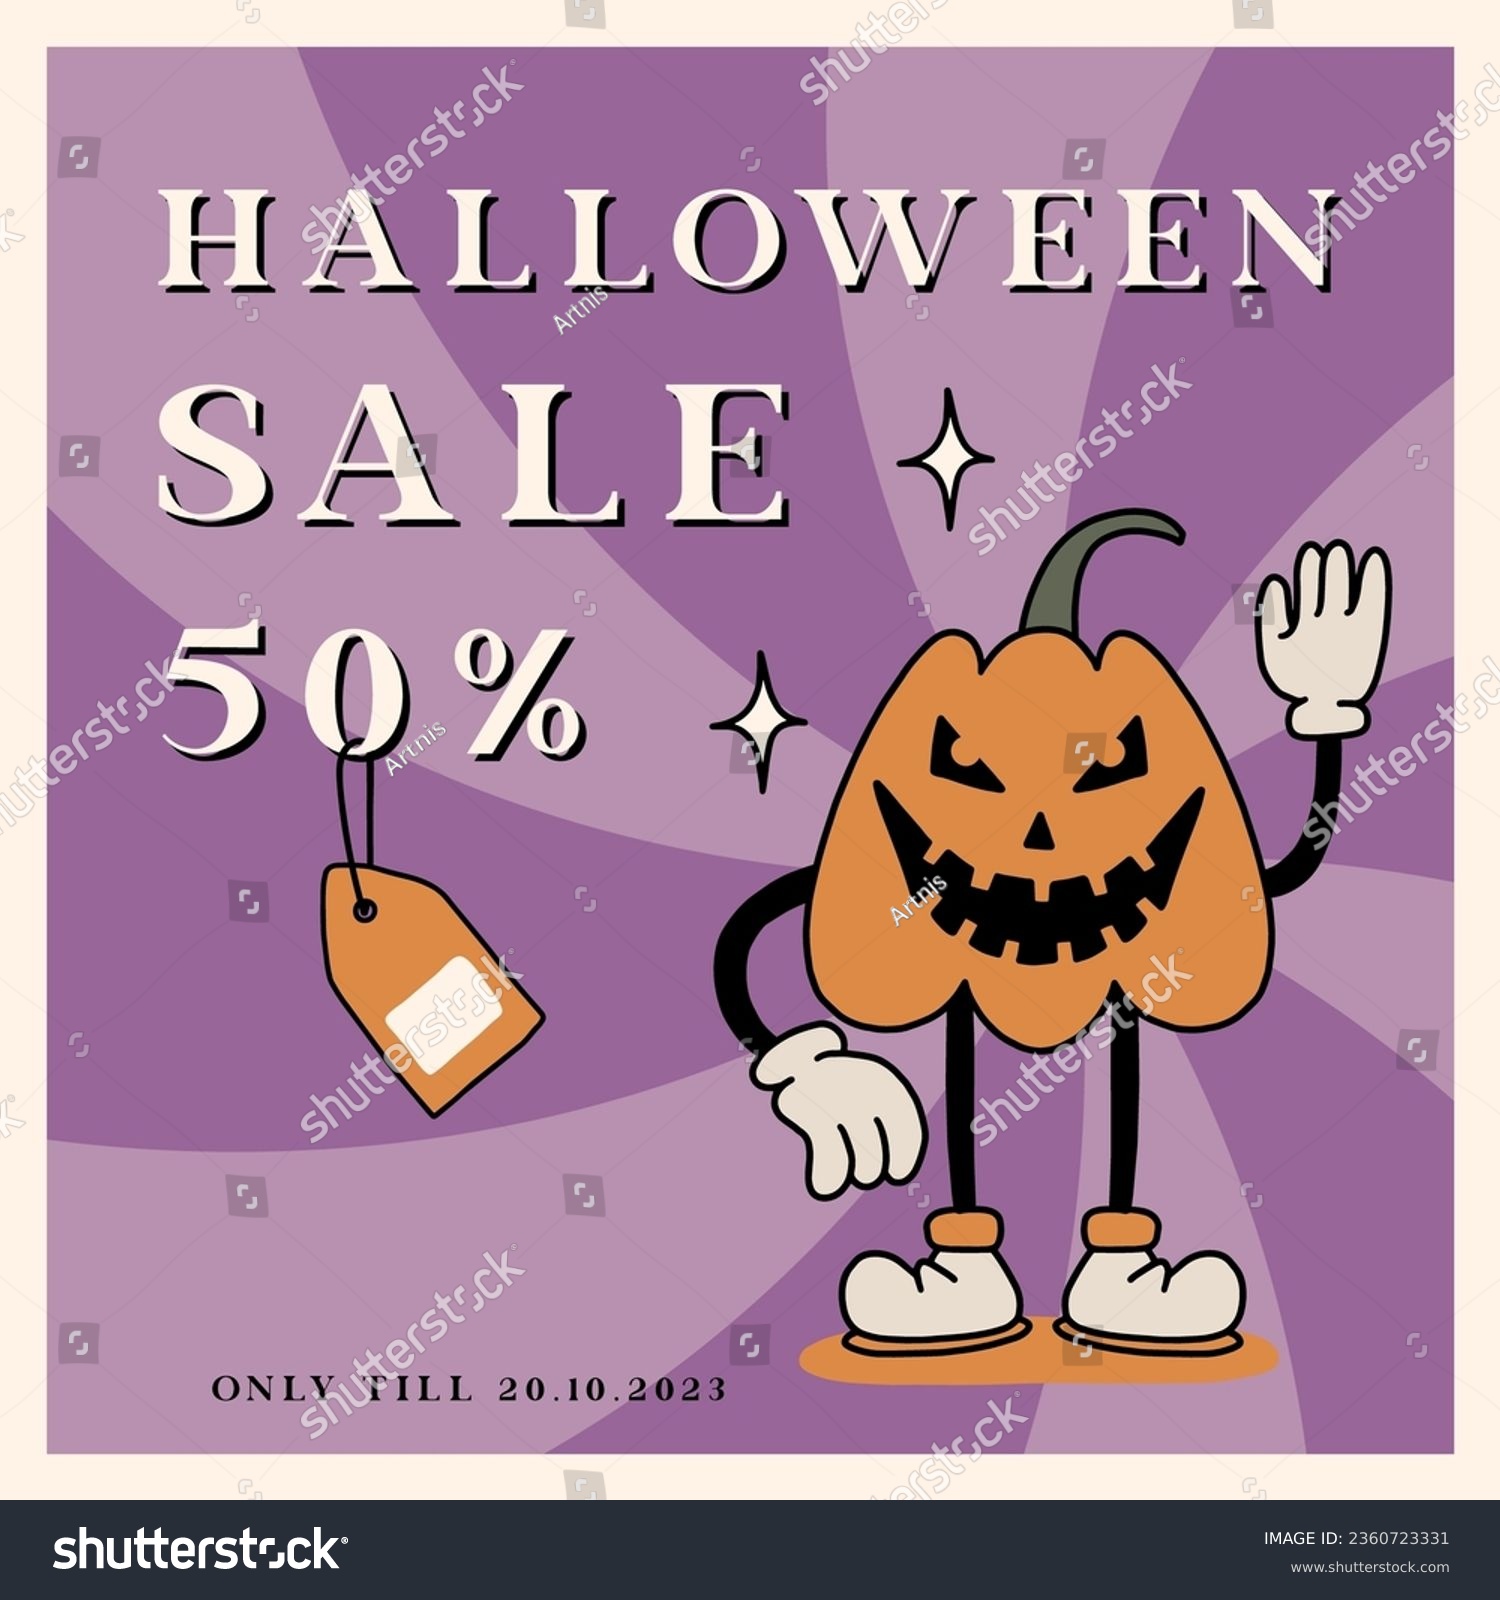 SVG of Retro Happy Halloween Sale banner with spooky cartoon Pumpkin Character in groovy 70s Vintage Style. Autumn holiday Sale offer ad with scary pumpkin mascot. Contour cartoon style vector illustration svg